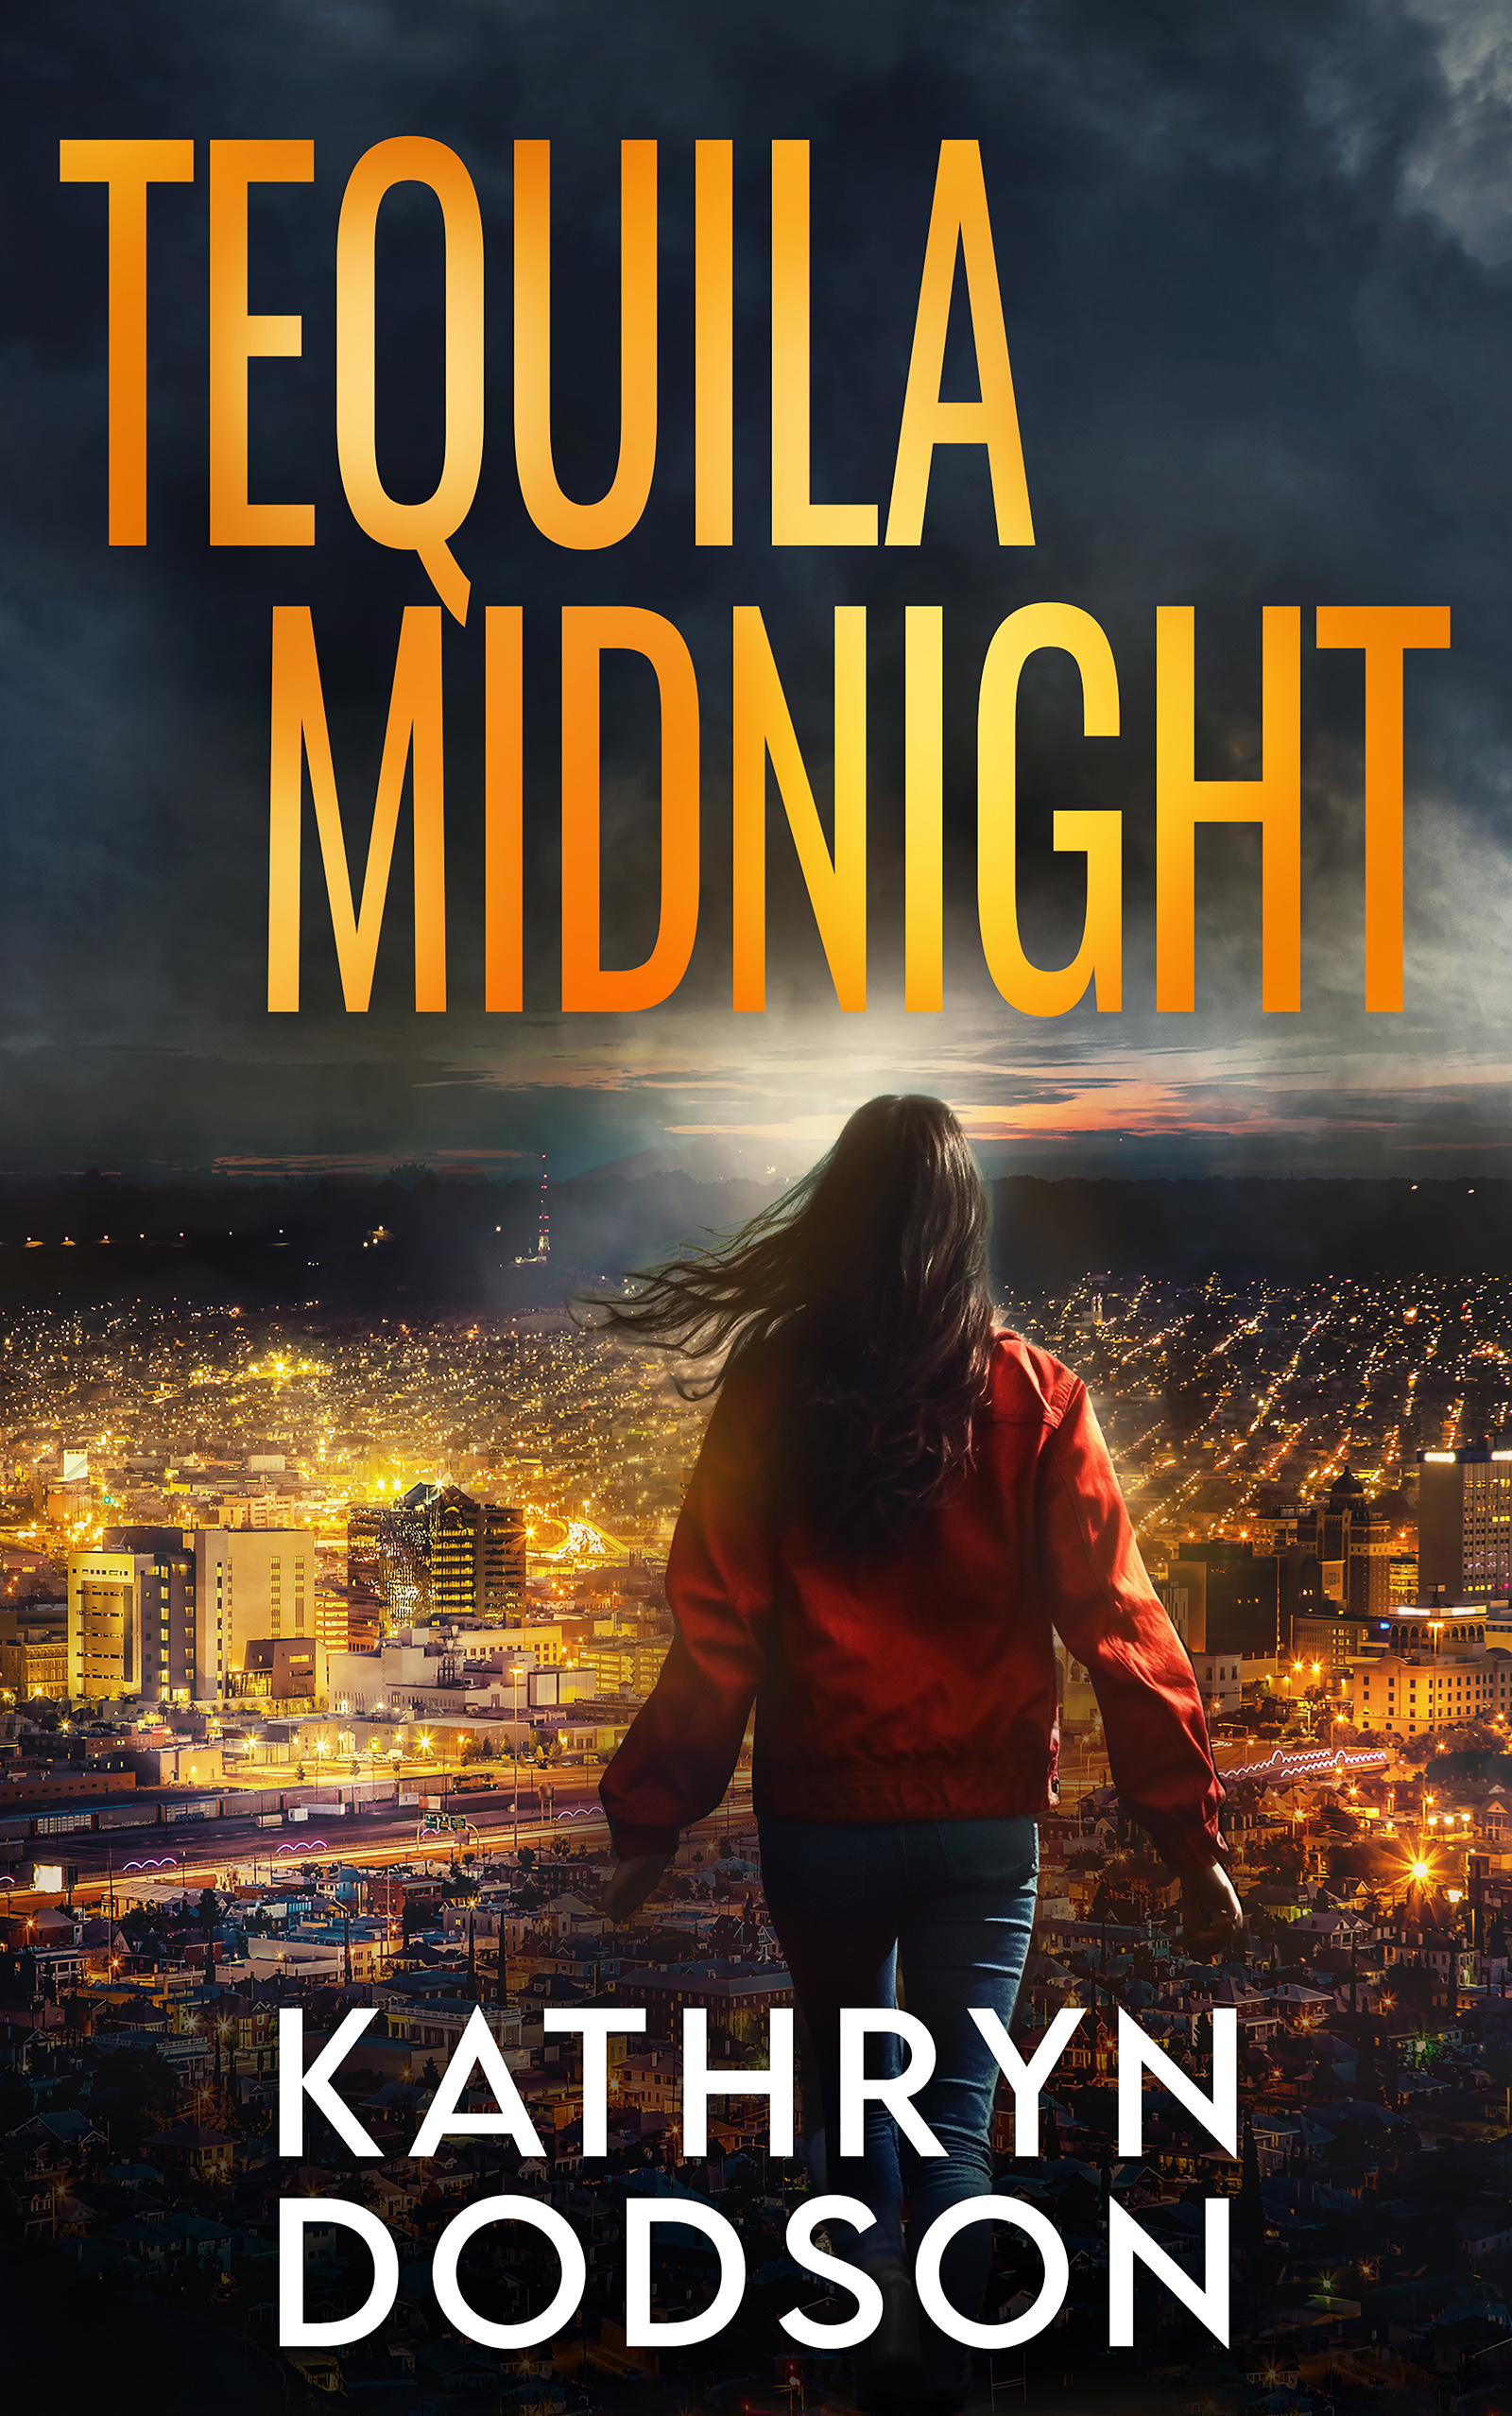 book cover with the back of a woman in a red jacket facing a city at night